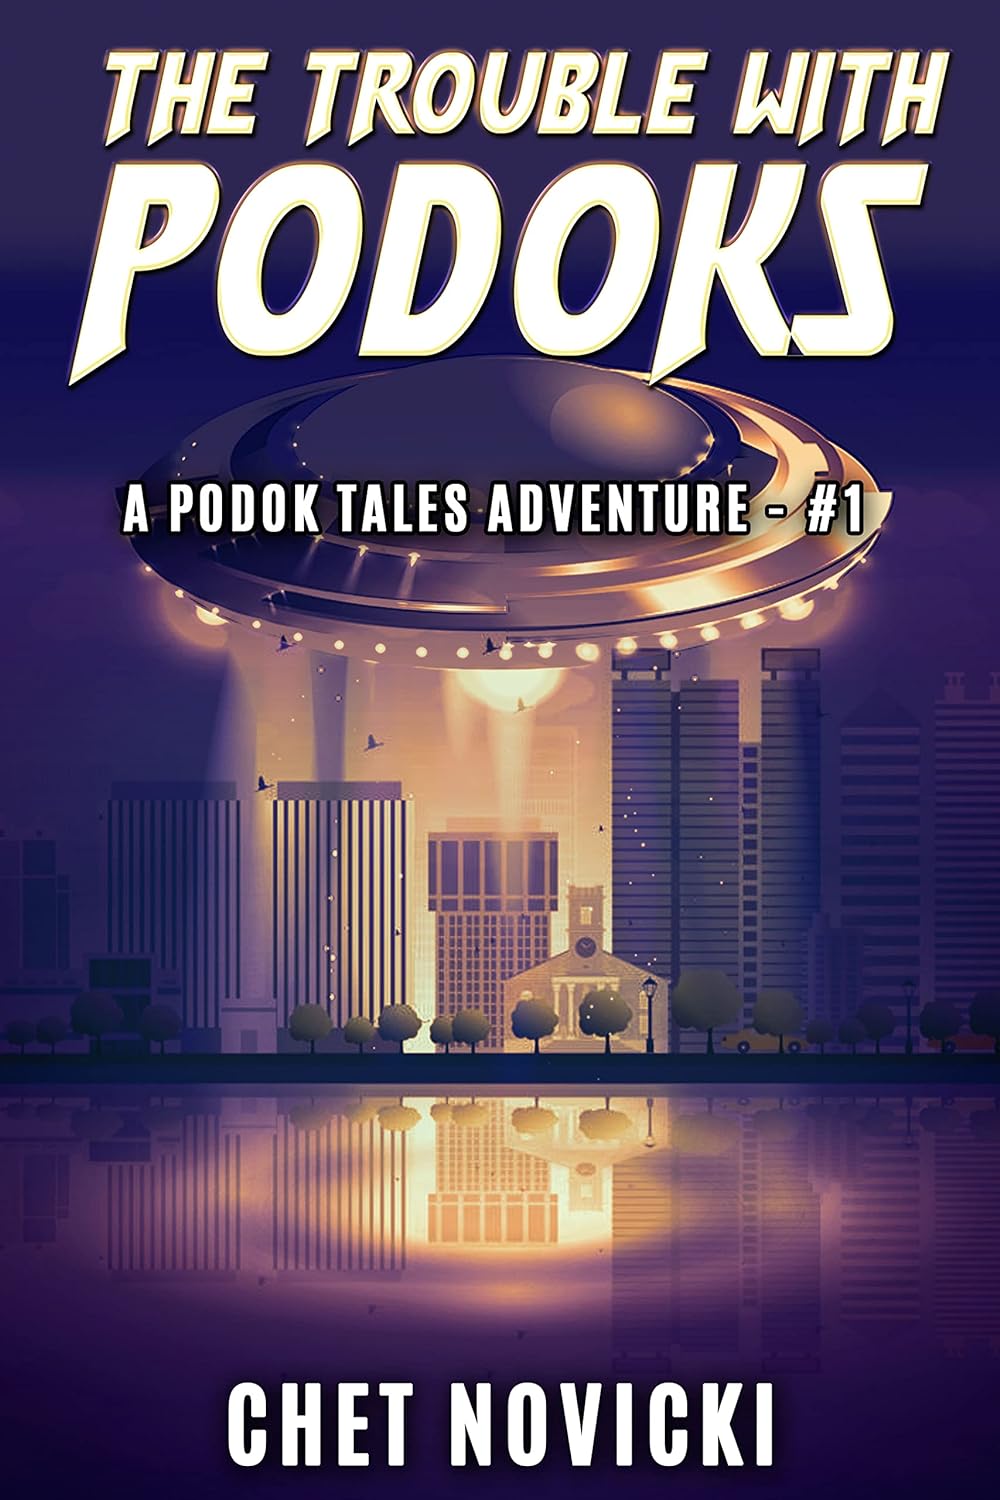 The Trouble with Podoks Fast-paced, humorous, first contact science fiction adventure by Bestselling Author Chet Novicki